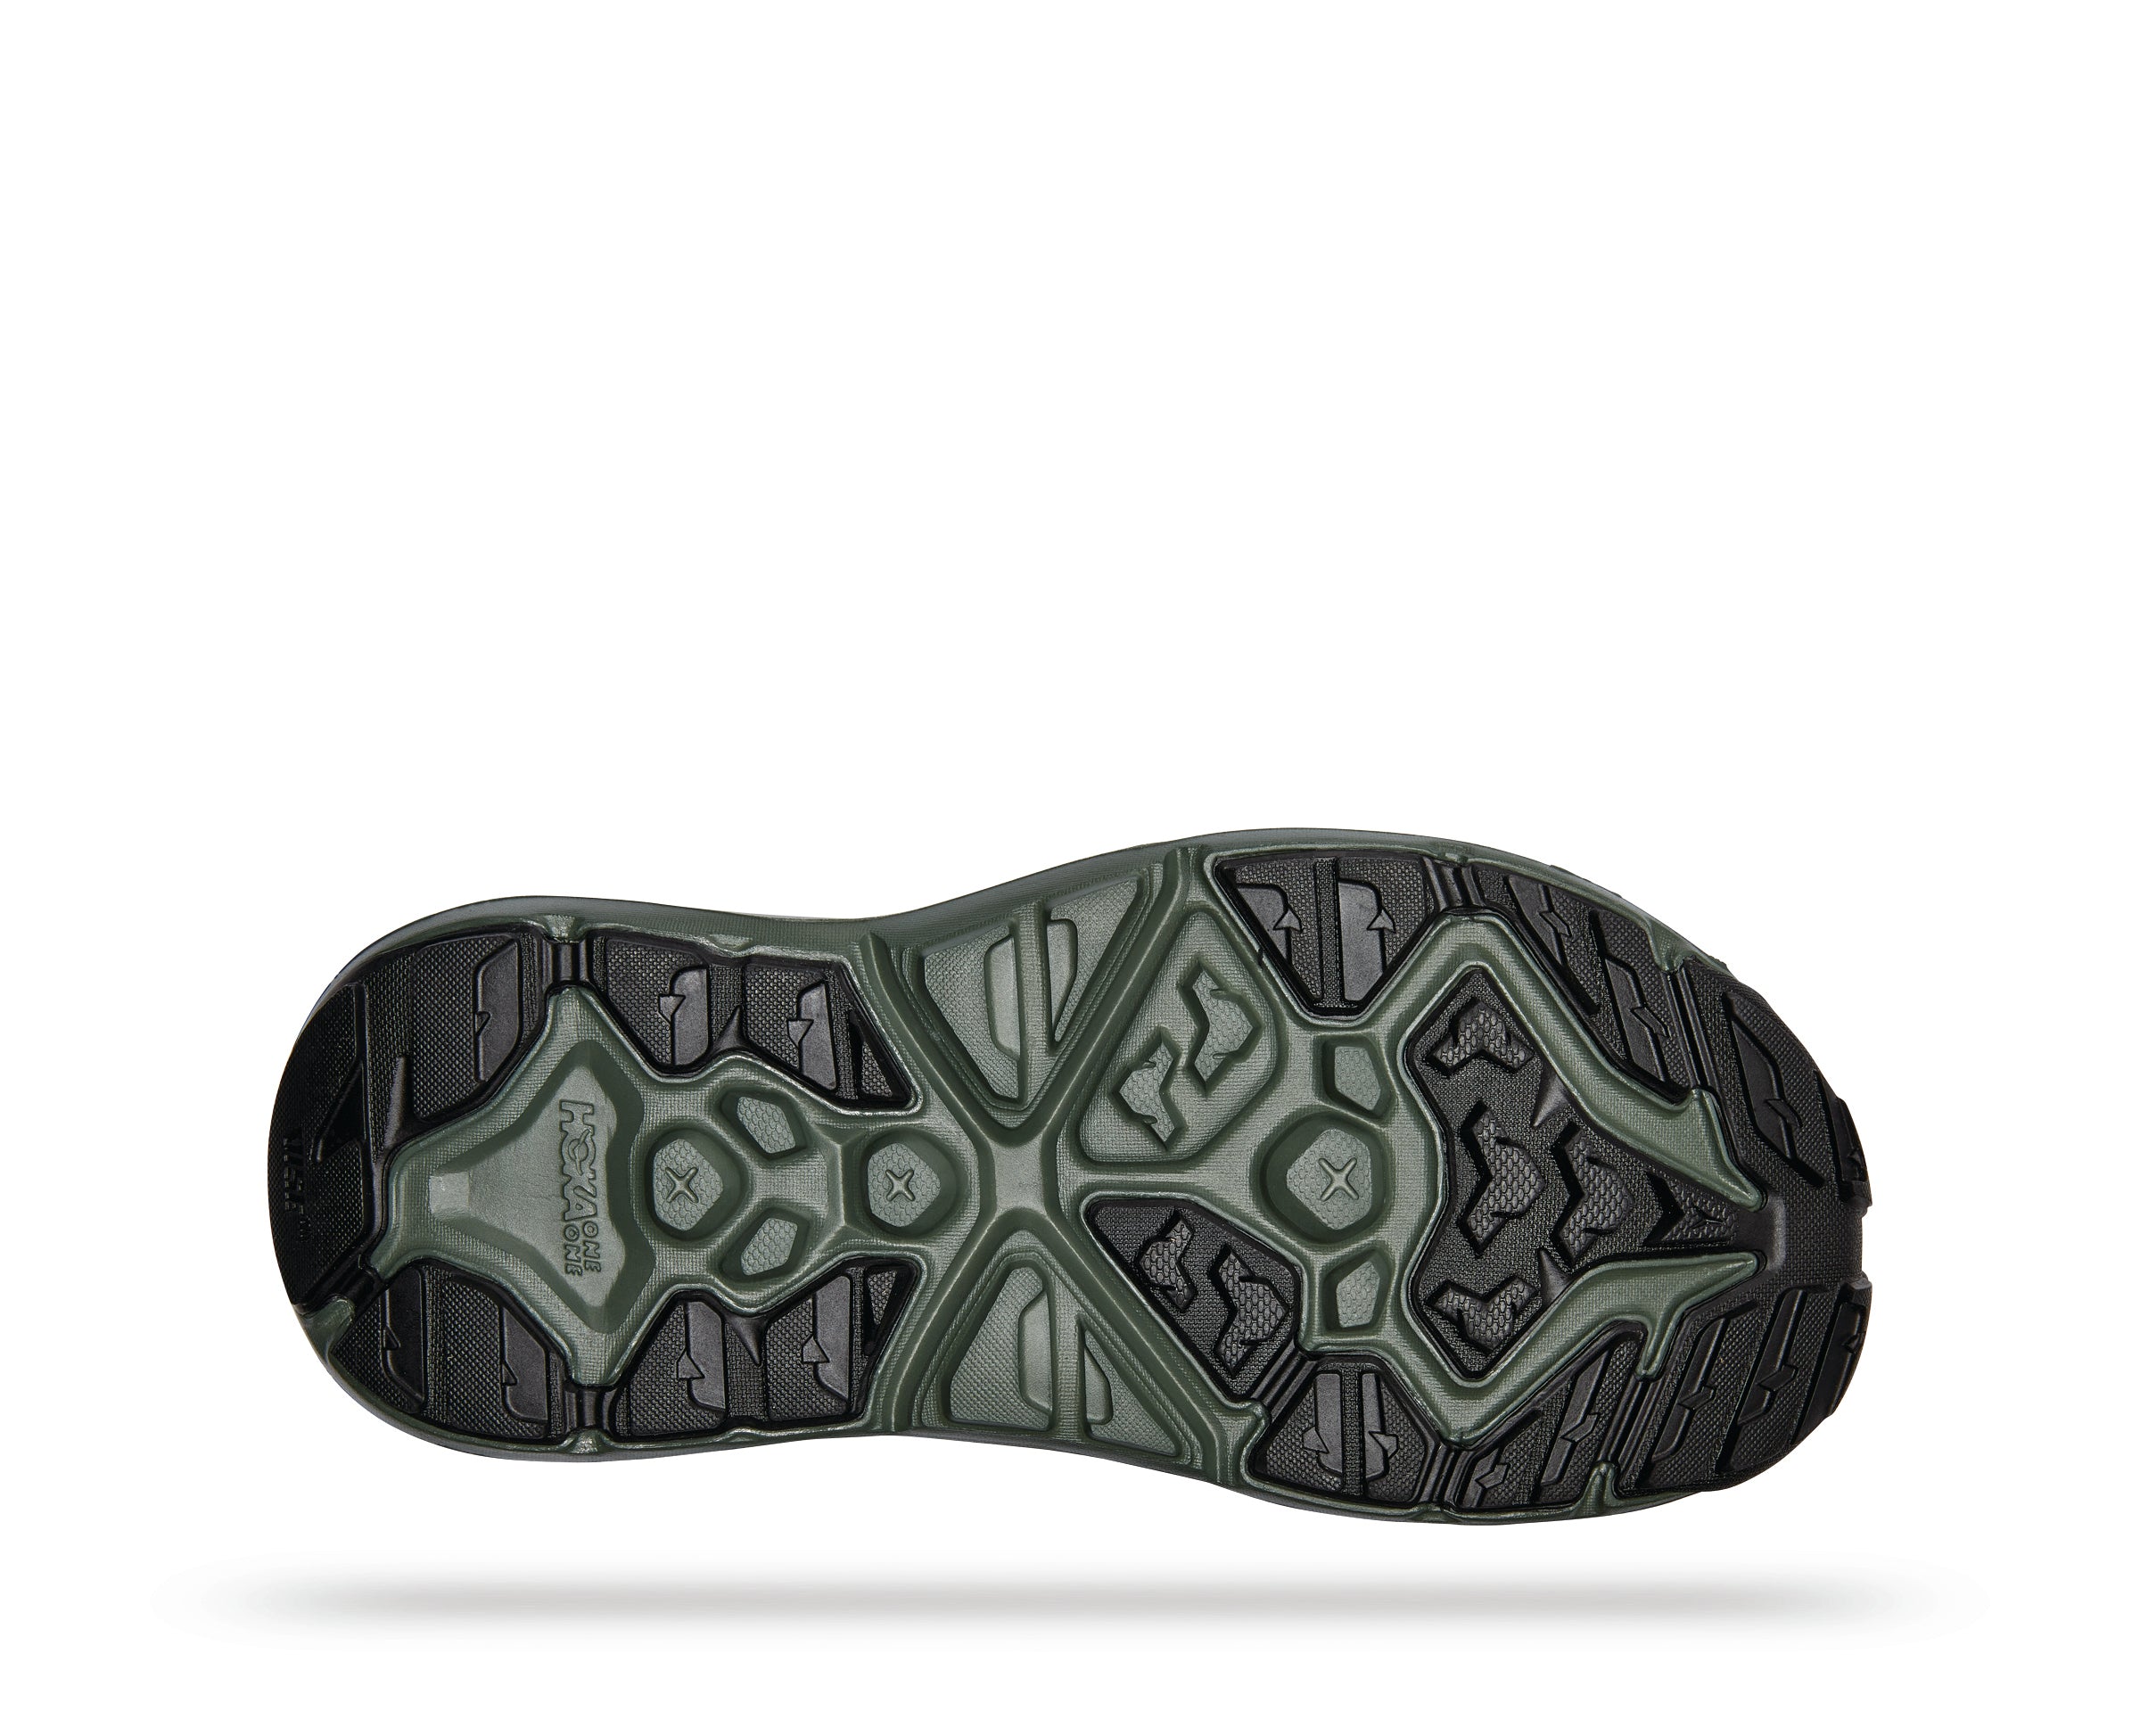 Bottom (outer sole) view of the Men's Hopara sandal by HOKA in the color Castlerock / Thyme